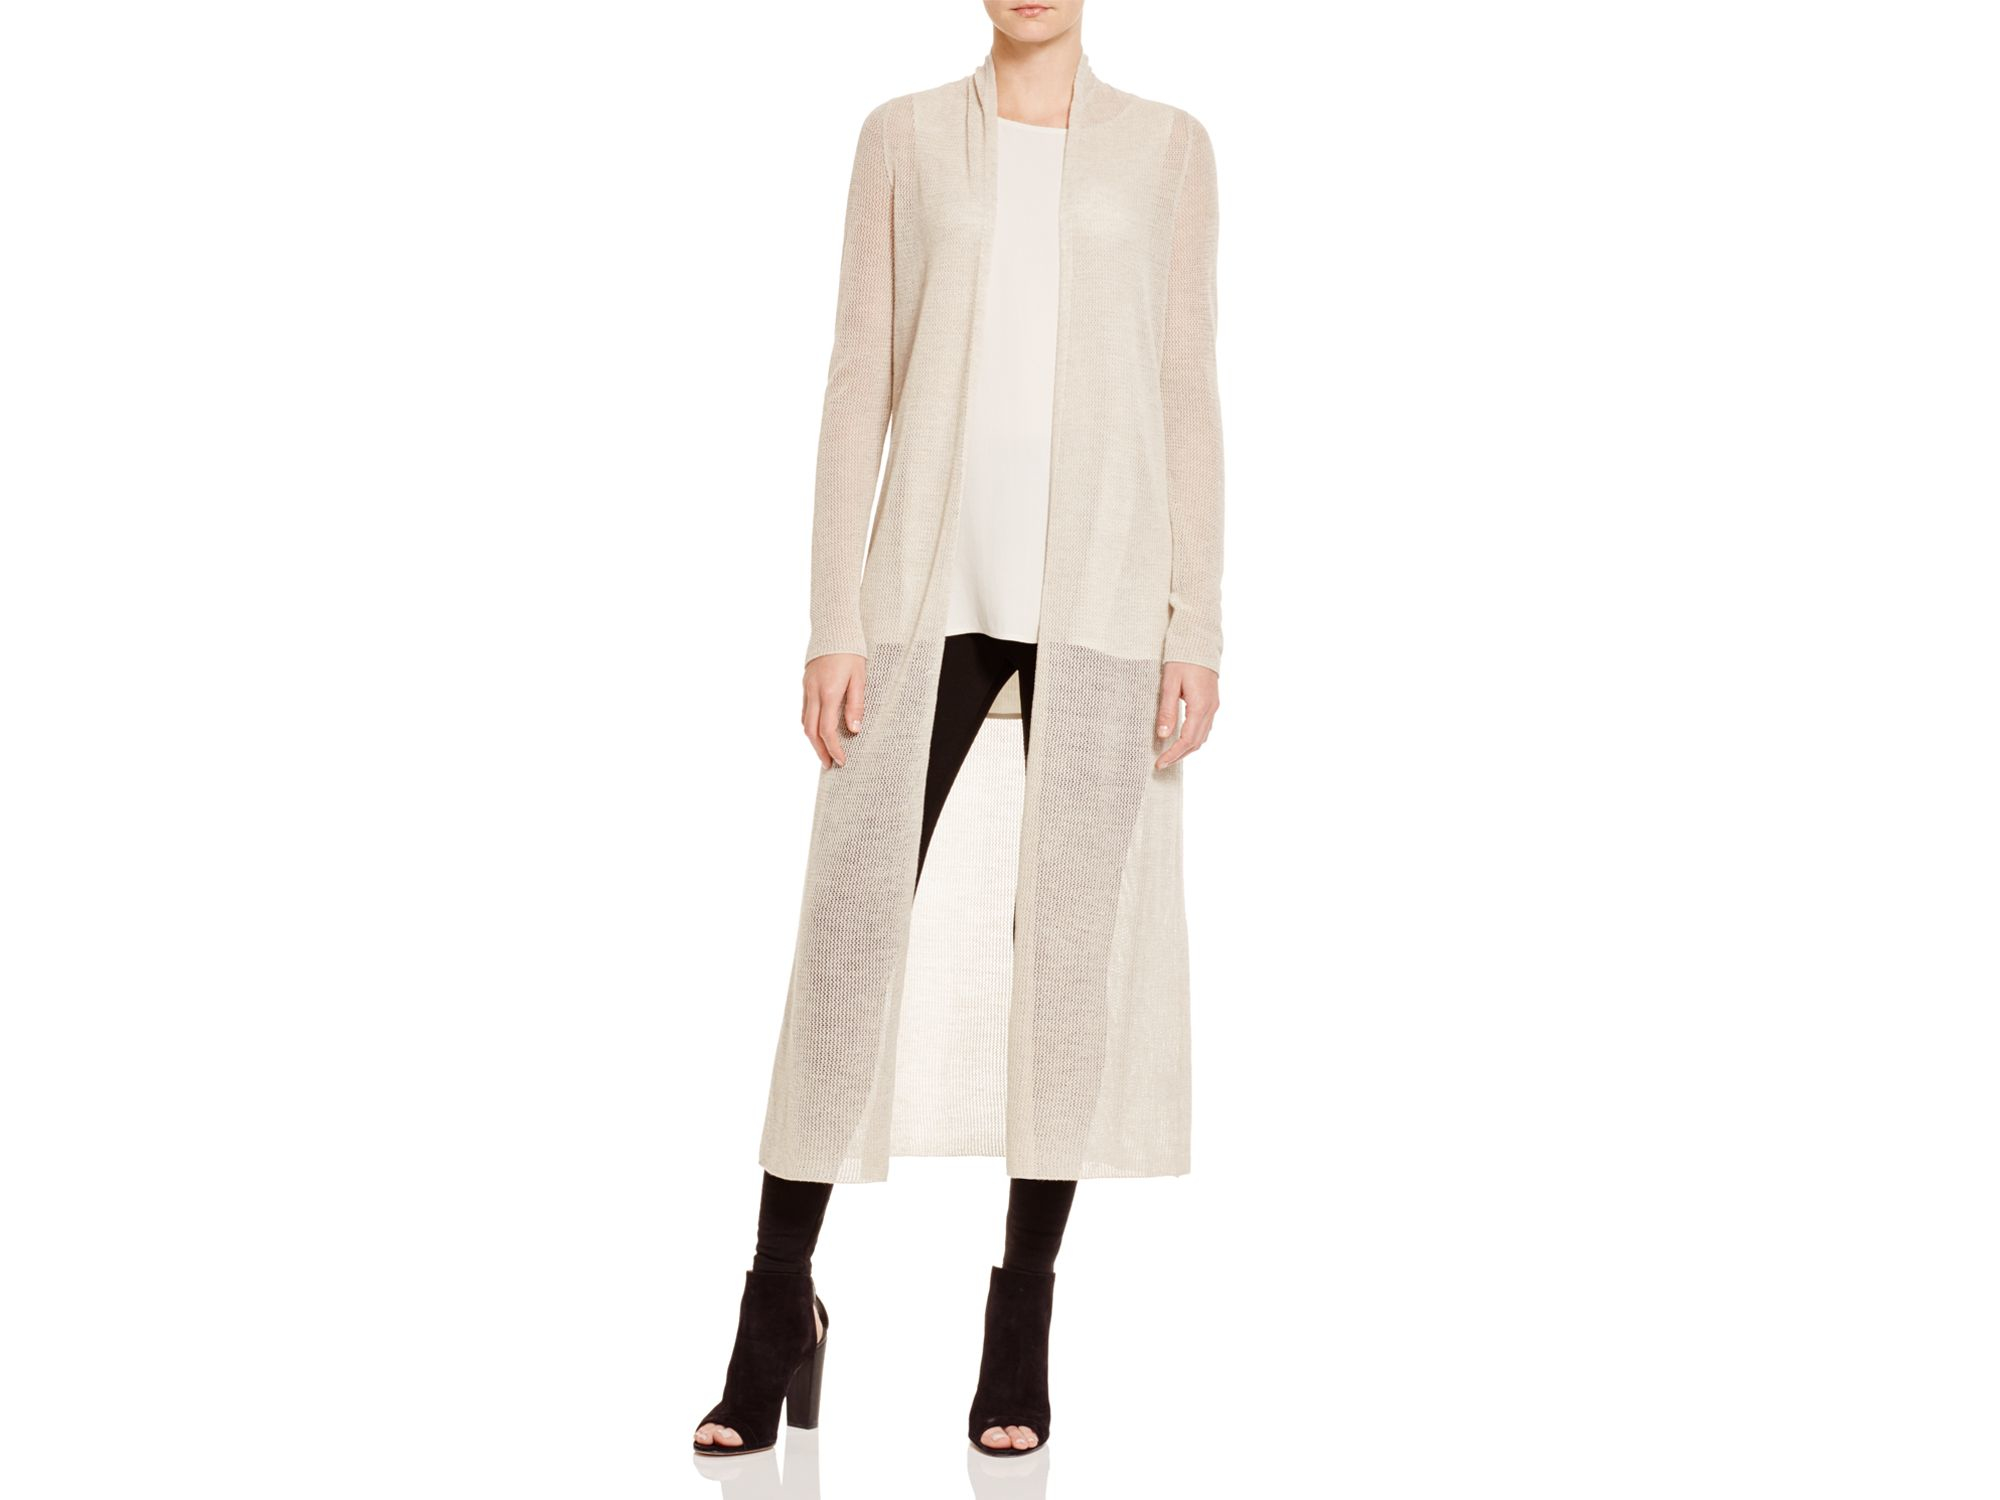 Eileen fisher Sheer Long Cardigan in Natural | Lyst